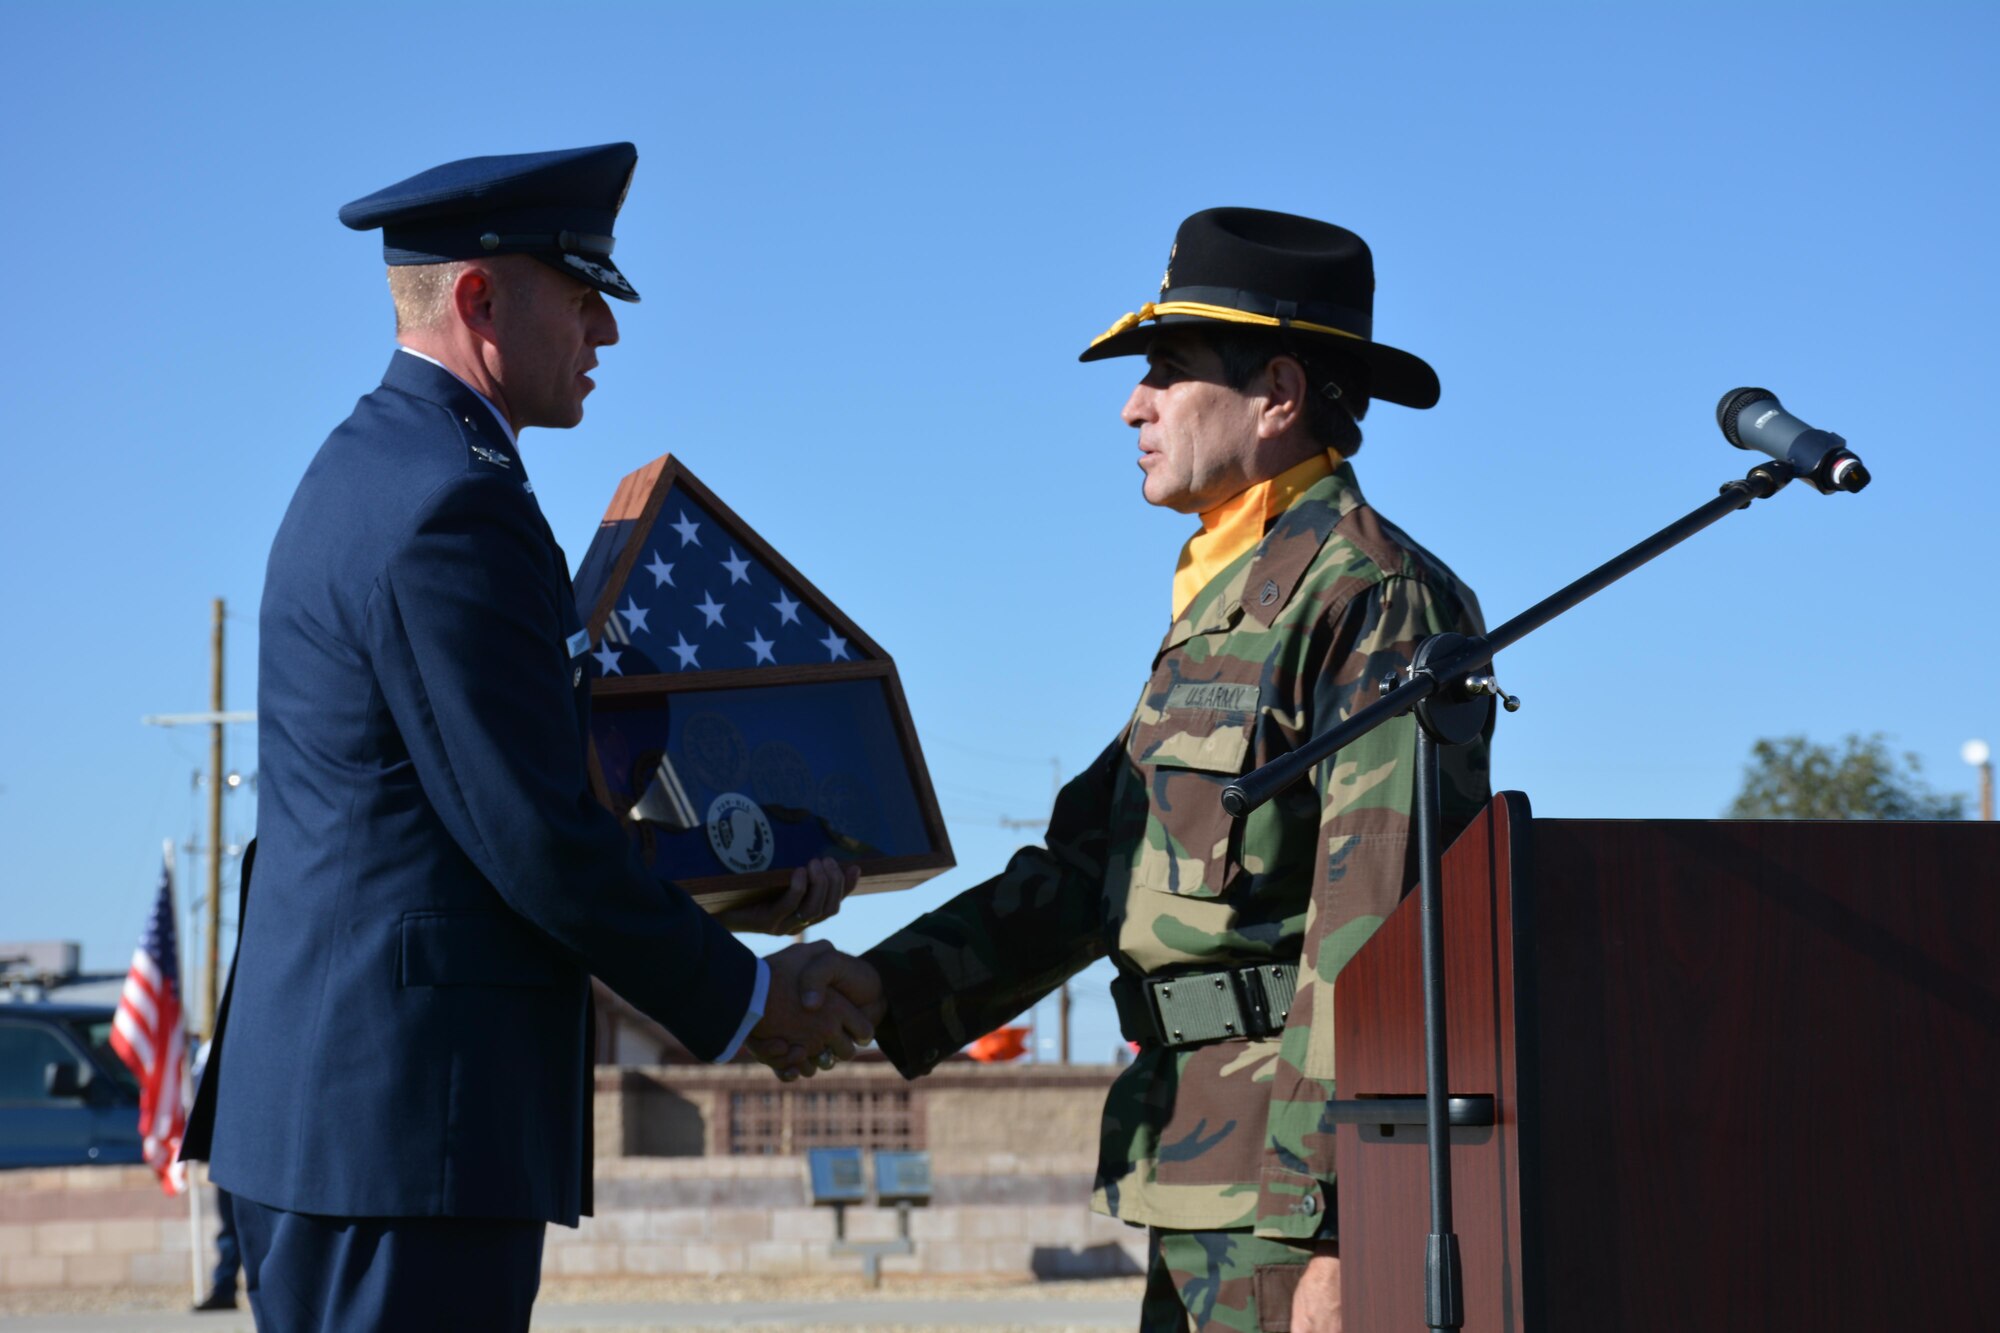 Colonel Ryan Craycraft, the 49th Wing vice commander, presents a shadow box to Staff Sgt. Darrell Mond, U.S. Army veteran, and guest speaker, at the POW/MIA remembrance ceremony at Holloman Air Force Base, N.M., on Sept. 16, 2016. The ceremony, which was in remembrance of prisoners of war and those still missing in action, was part of Holloman’s POW/MIA commemoration. (U.S. Air Force photo by Staff Sgt. Warren Spearman)